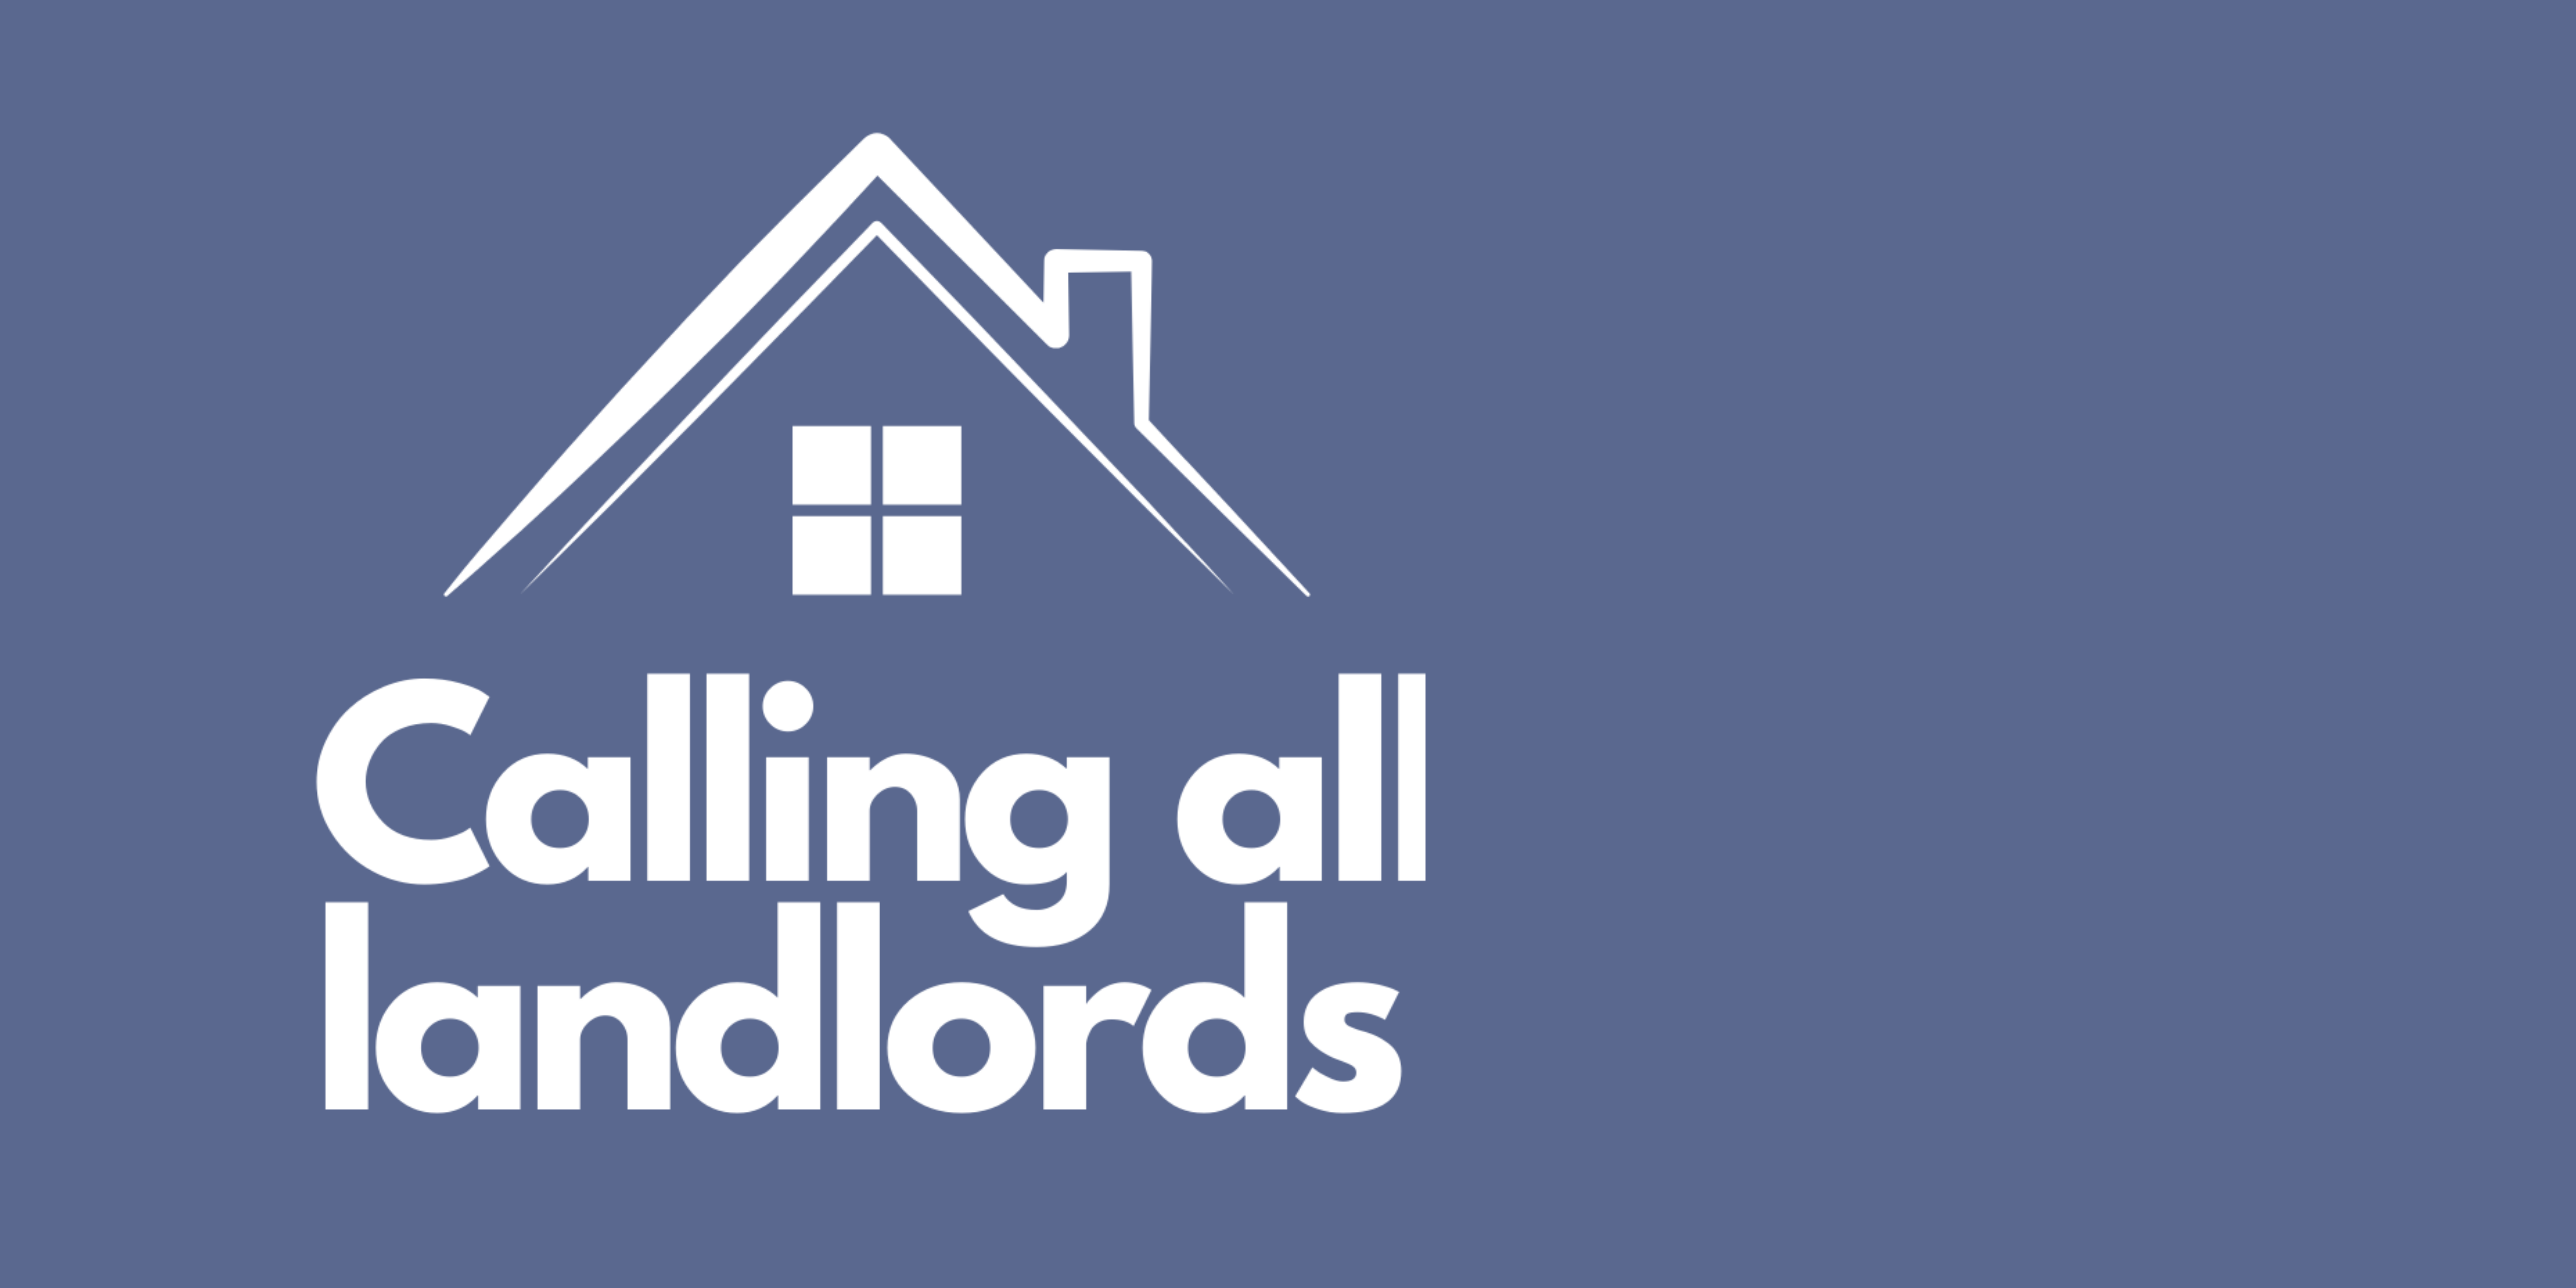 A white cartoon outline of a house, beside which are the words 'Calling all landlords'